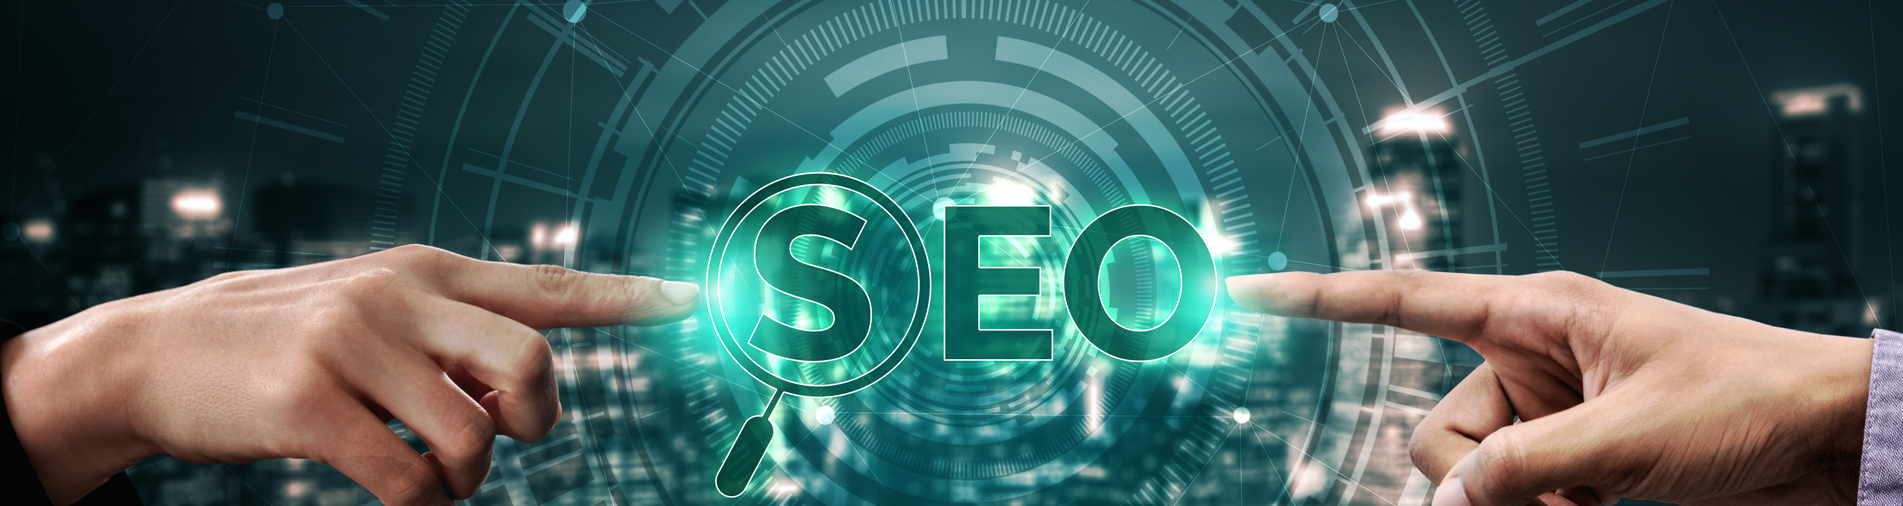 seo could be helpful for businesses during this pandemic